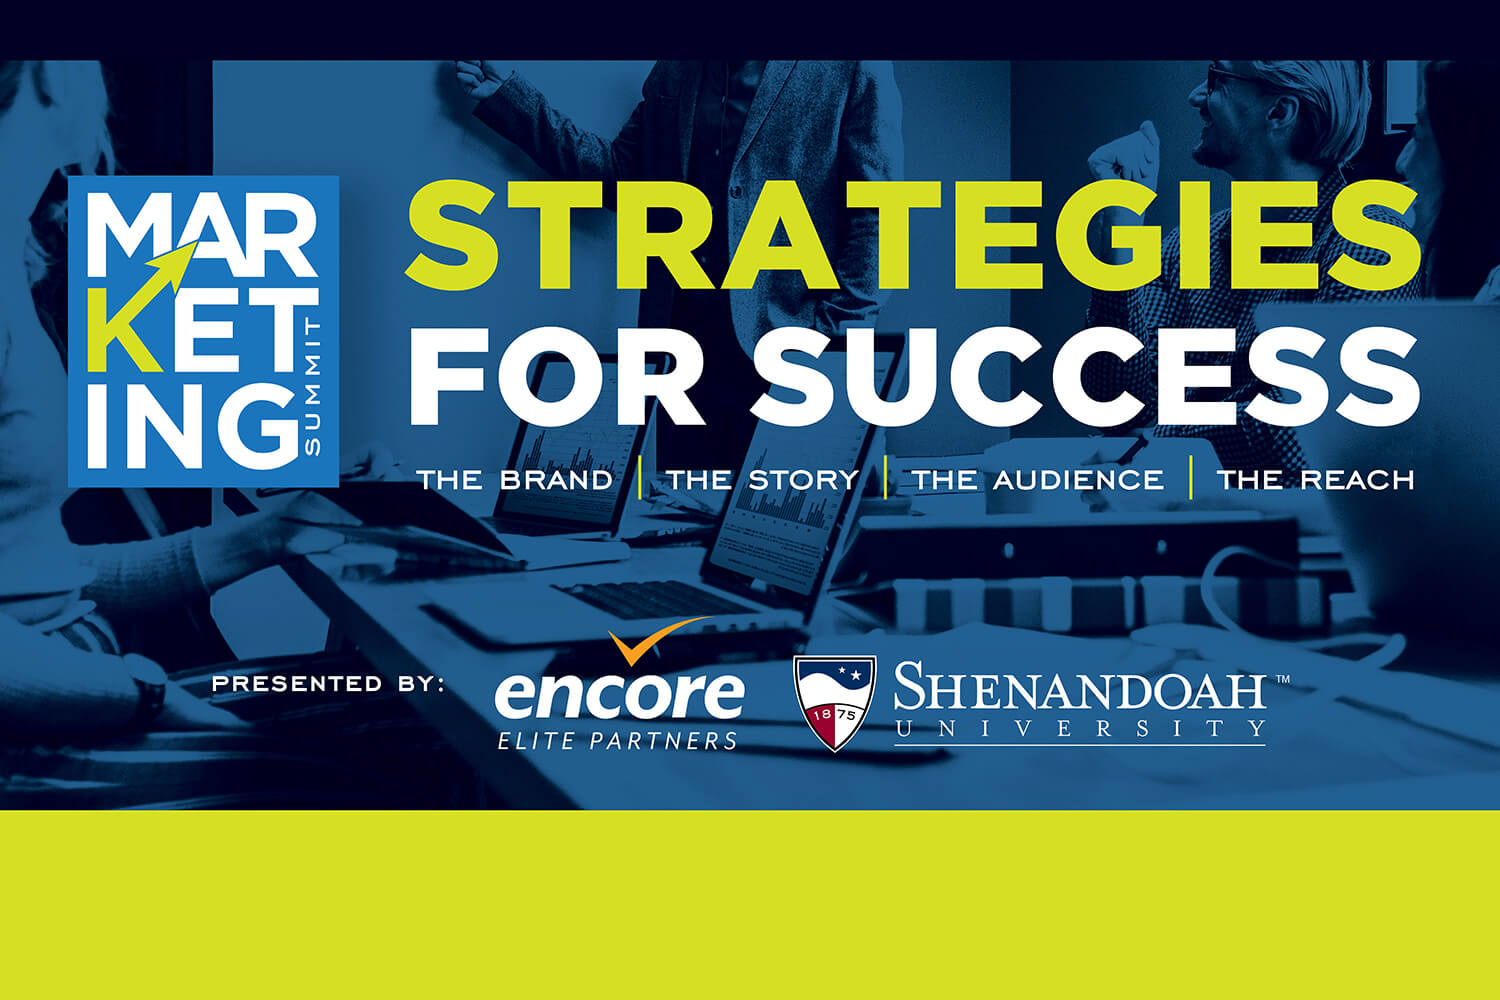 Summit Offers Strategies For Successful Marketing Event highlights trends and best marketing media